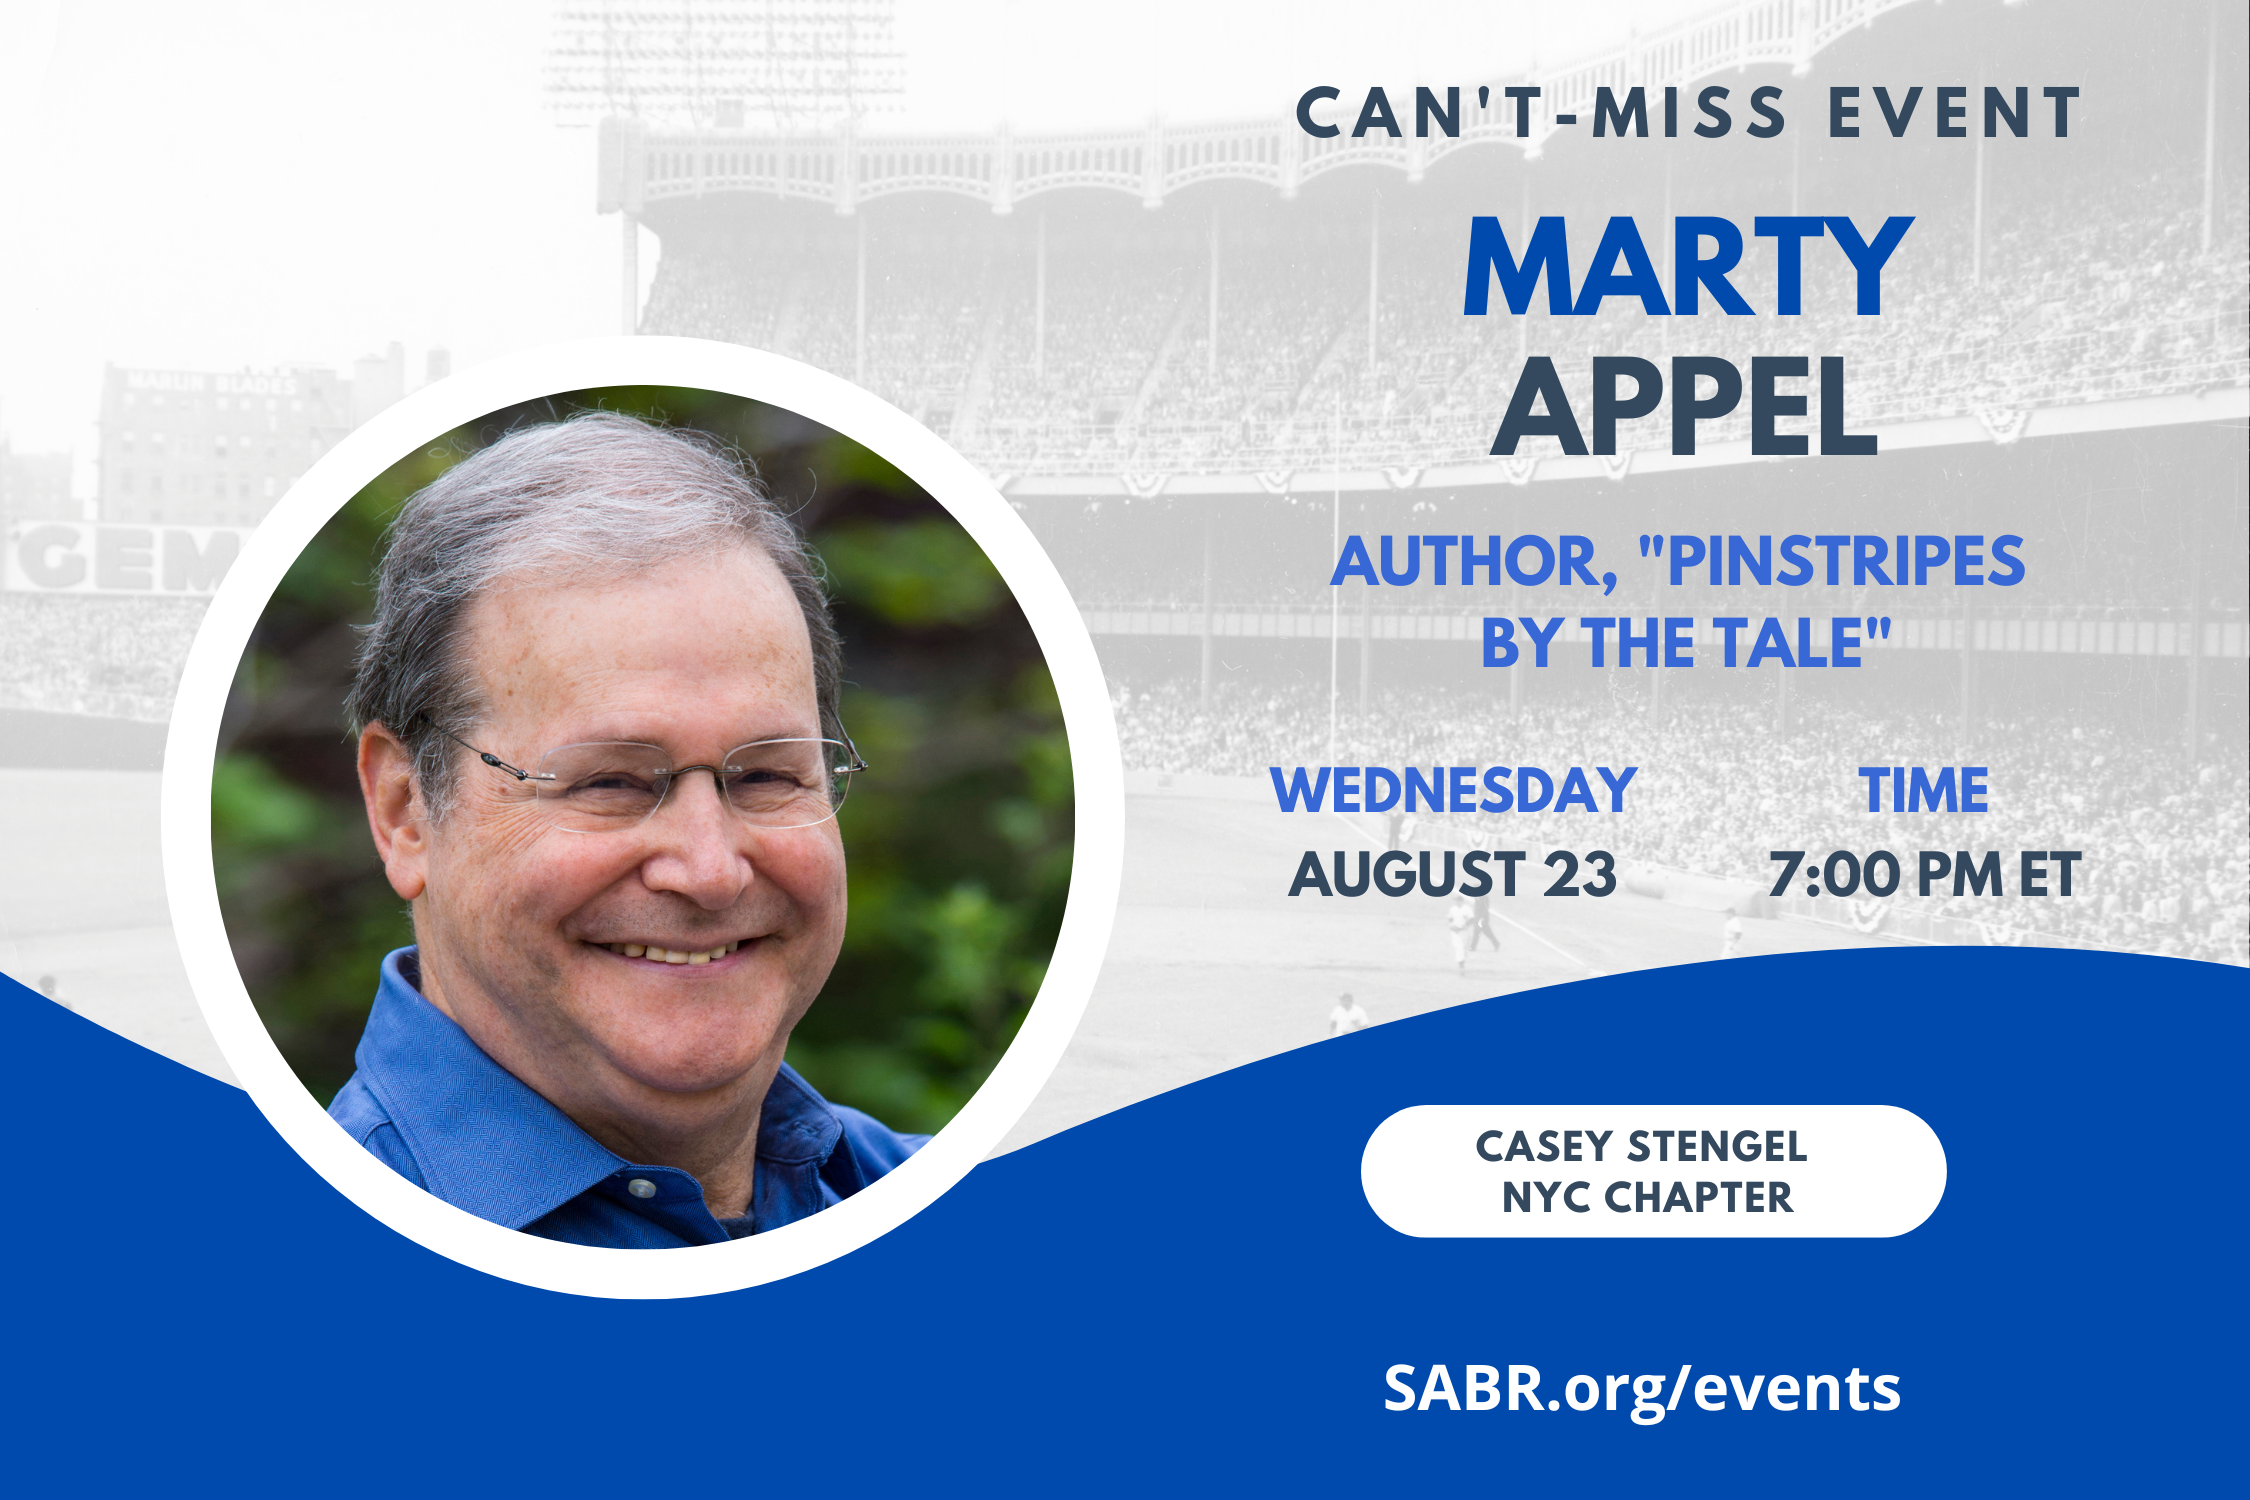 SABR's Casey Stengel NYC Chapter will hold a virtual Zoom meeting at 7:00 p.m. EDT on Wednesday, August 23, 2023. All baseball fans are welcome to attend. Our guest speaker is Marty Appel to discuss his latest book, "Pinstripes by the Tale."